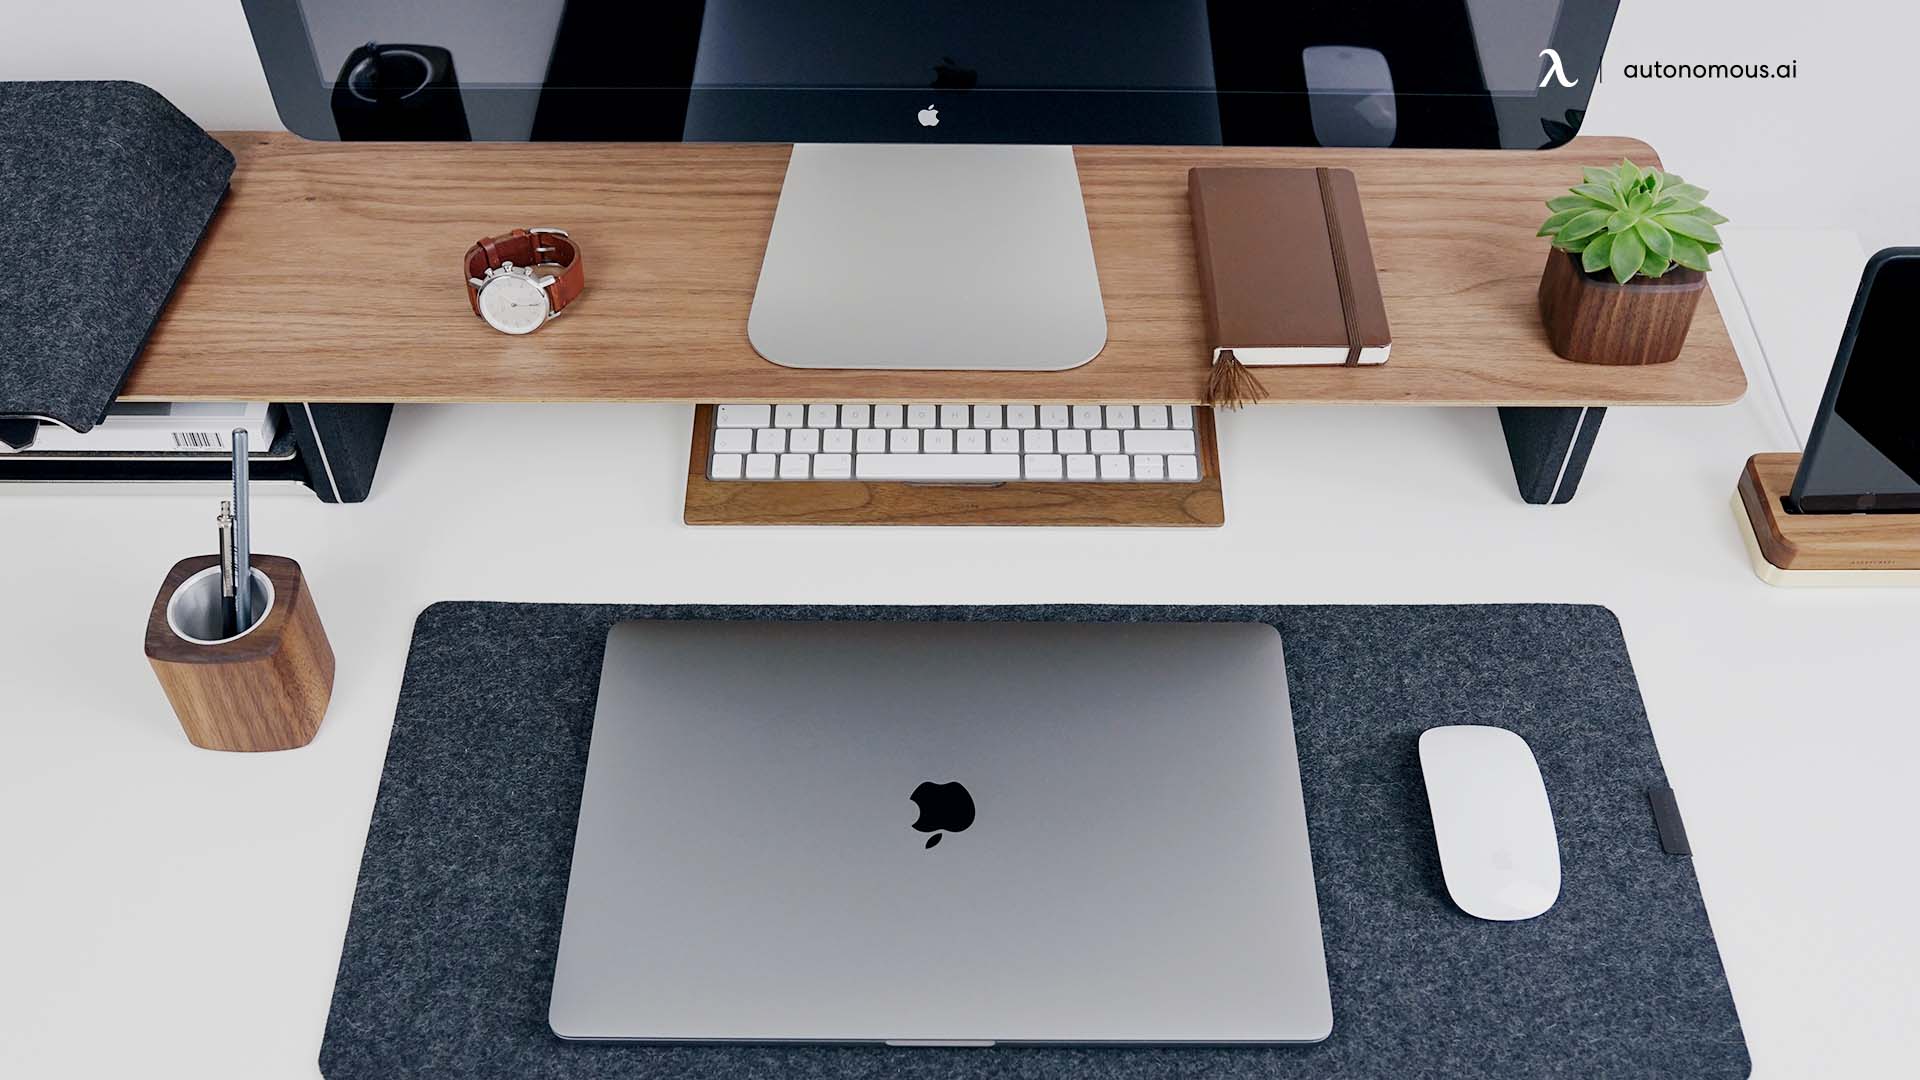 The Best Cubicle Accessories for Maximum Productivity